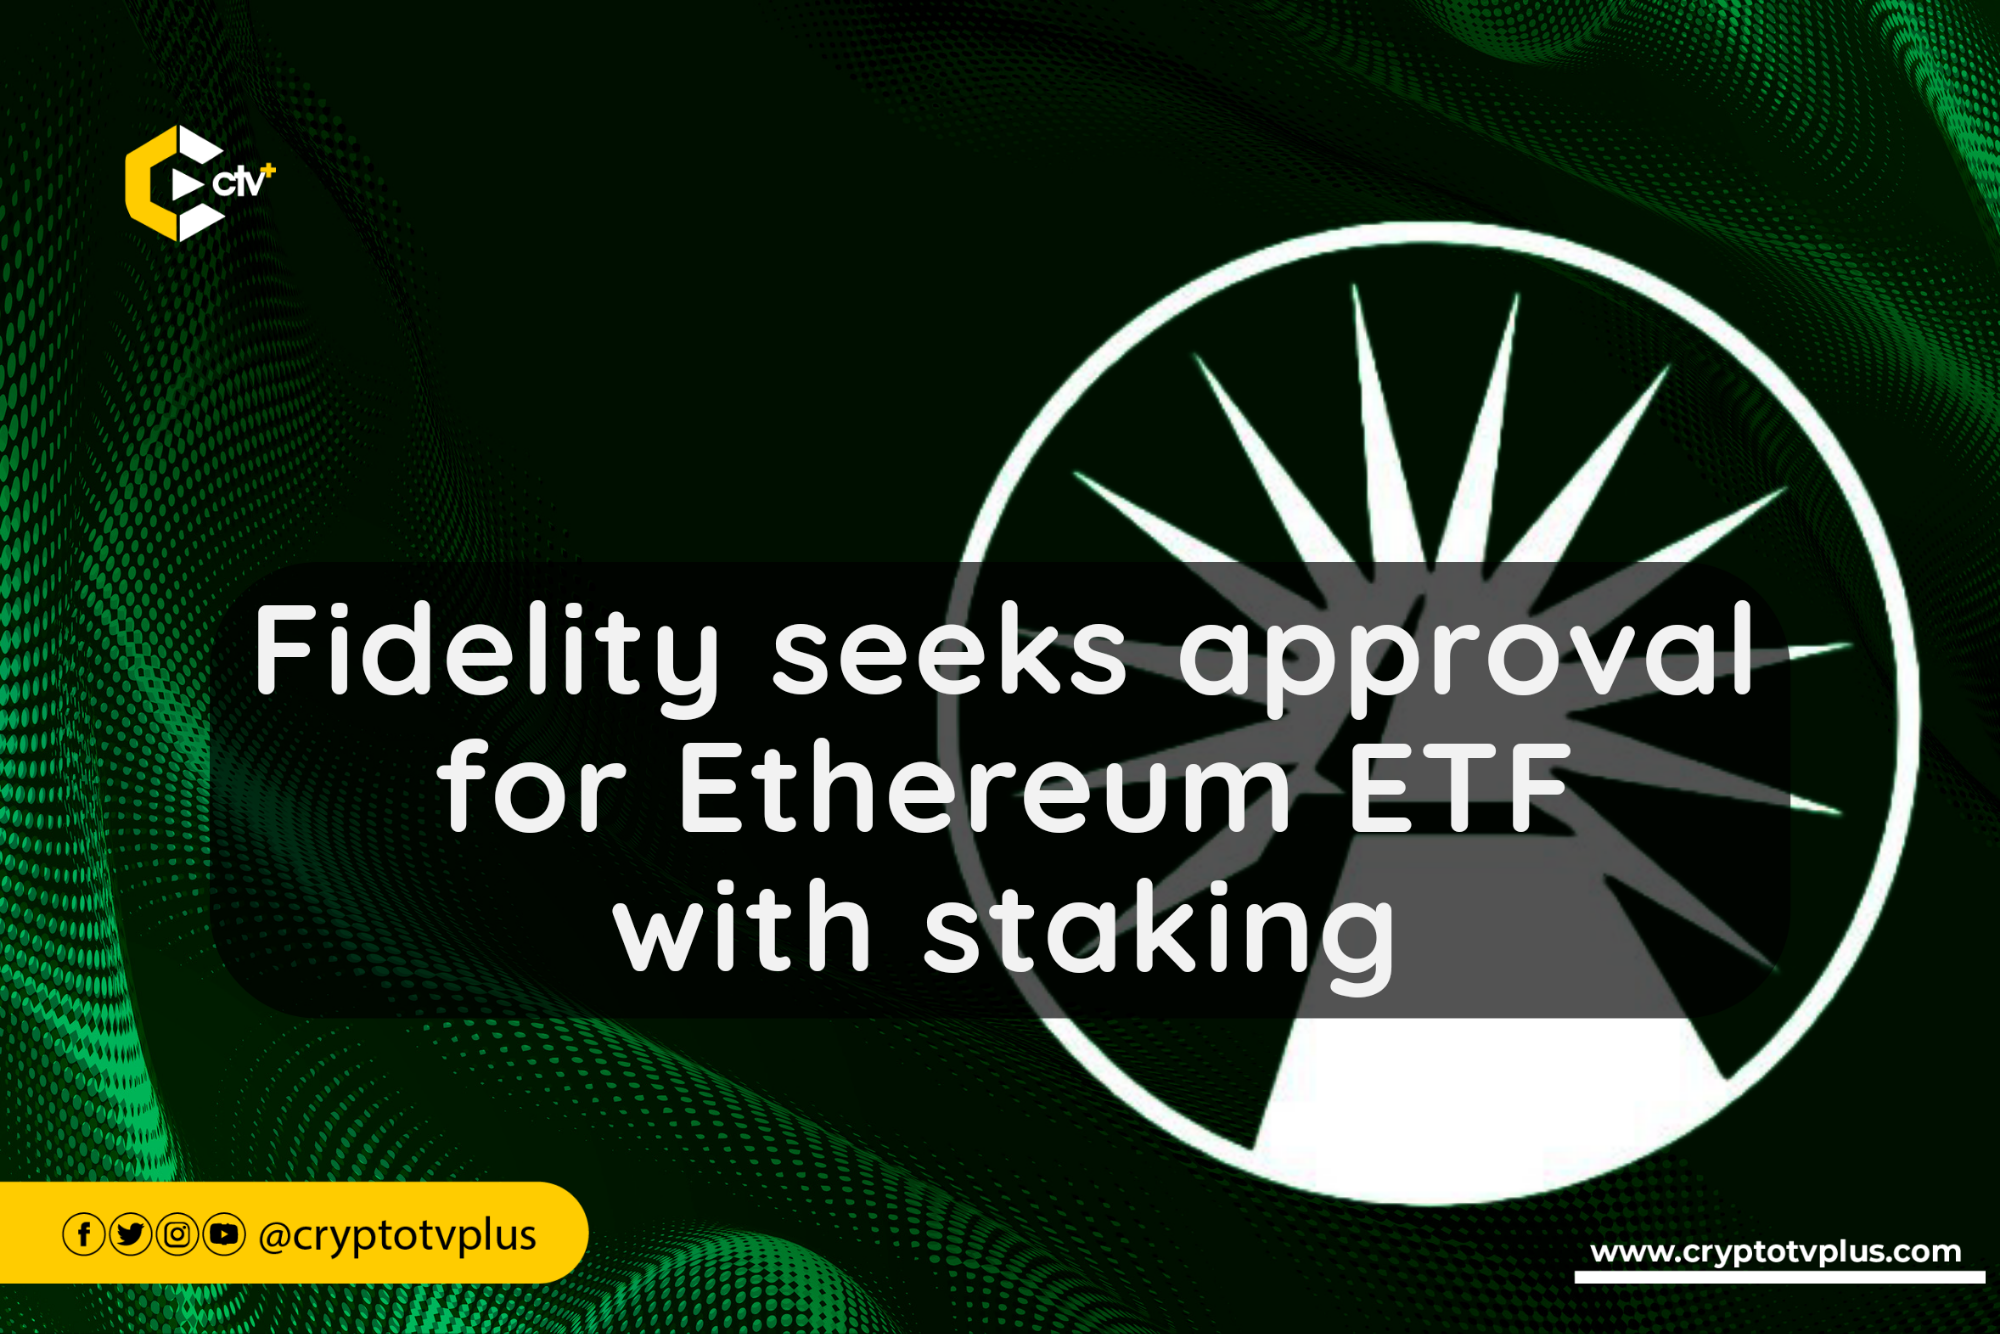 Fidelity is seeking approval for an Ethereum ETF that includes staking. This move could potentially open up new investment opportunities in the crypto market.